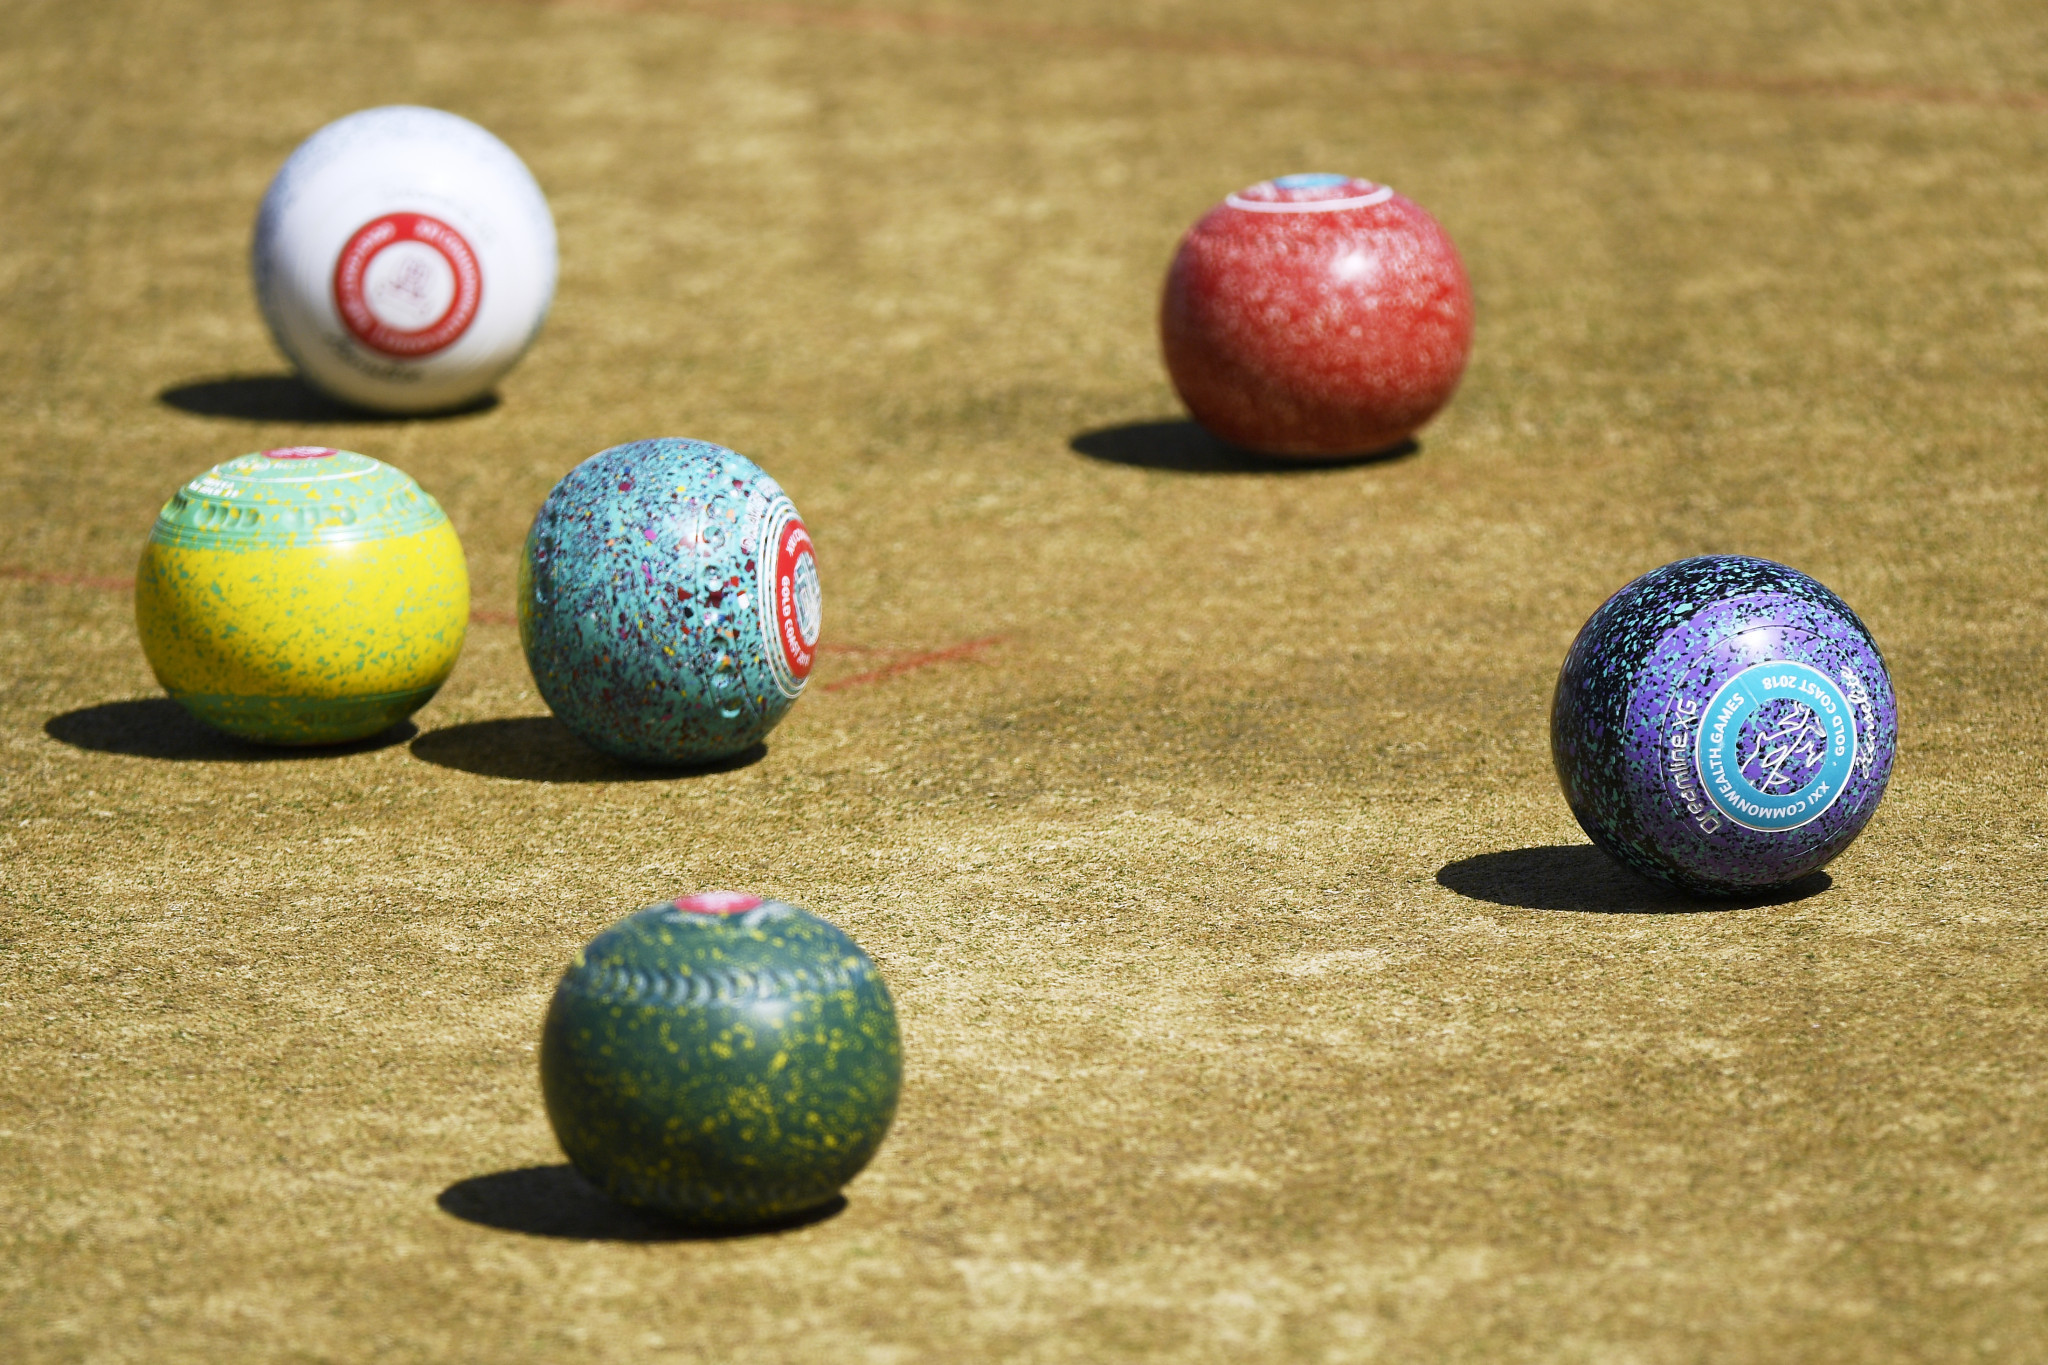 European Bowls Championships to be held in Ayr next July